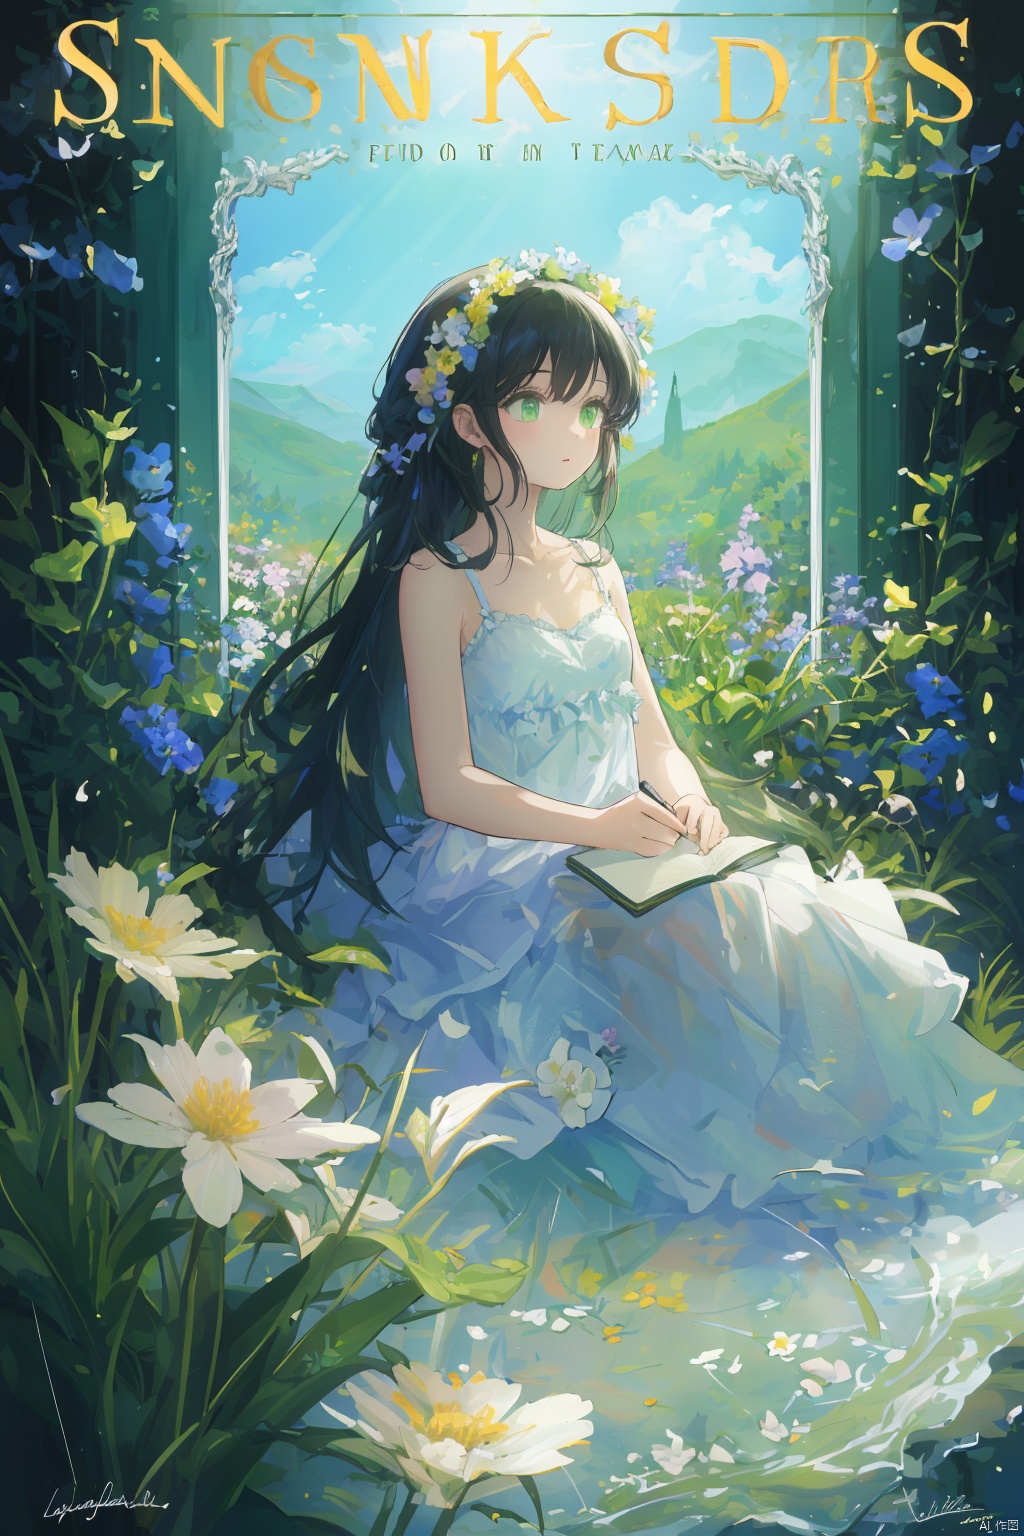 Best Quality, Masterpiece, Illustration, (Reflected Light), Unbelievable Absurdity, (Movie Poster), (Signature: 1.3), (English Text: 1.3), 1 Girl, Girl in the Middle of Flowers, Pure Sky Black Hair, Green Eyes, Clear Sky, Outside, Clavicle, Lori, Sitting, Ridiculous Long Hair, Clear Border of Cloth, White Dress, Fantastic Landscape, Flower Ground, Thousands of Flowers, Colorful Flowers, Flowers Around Her, All Kinds of Flowers